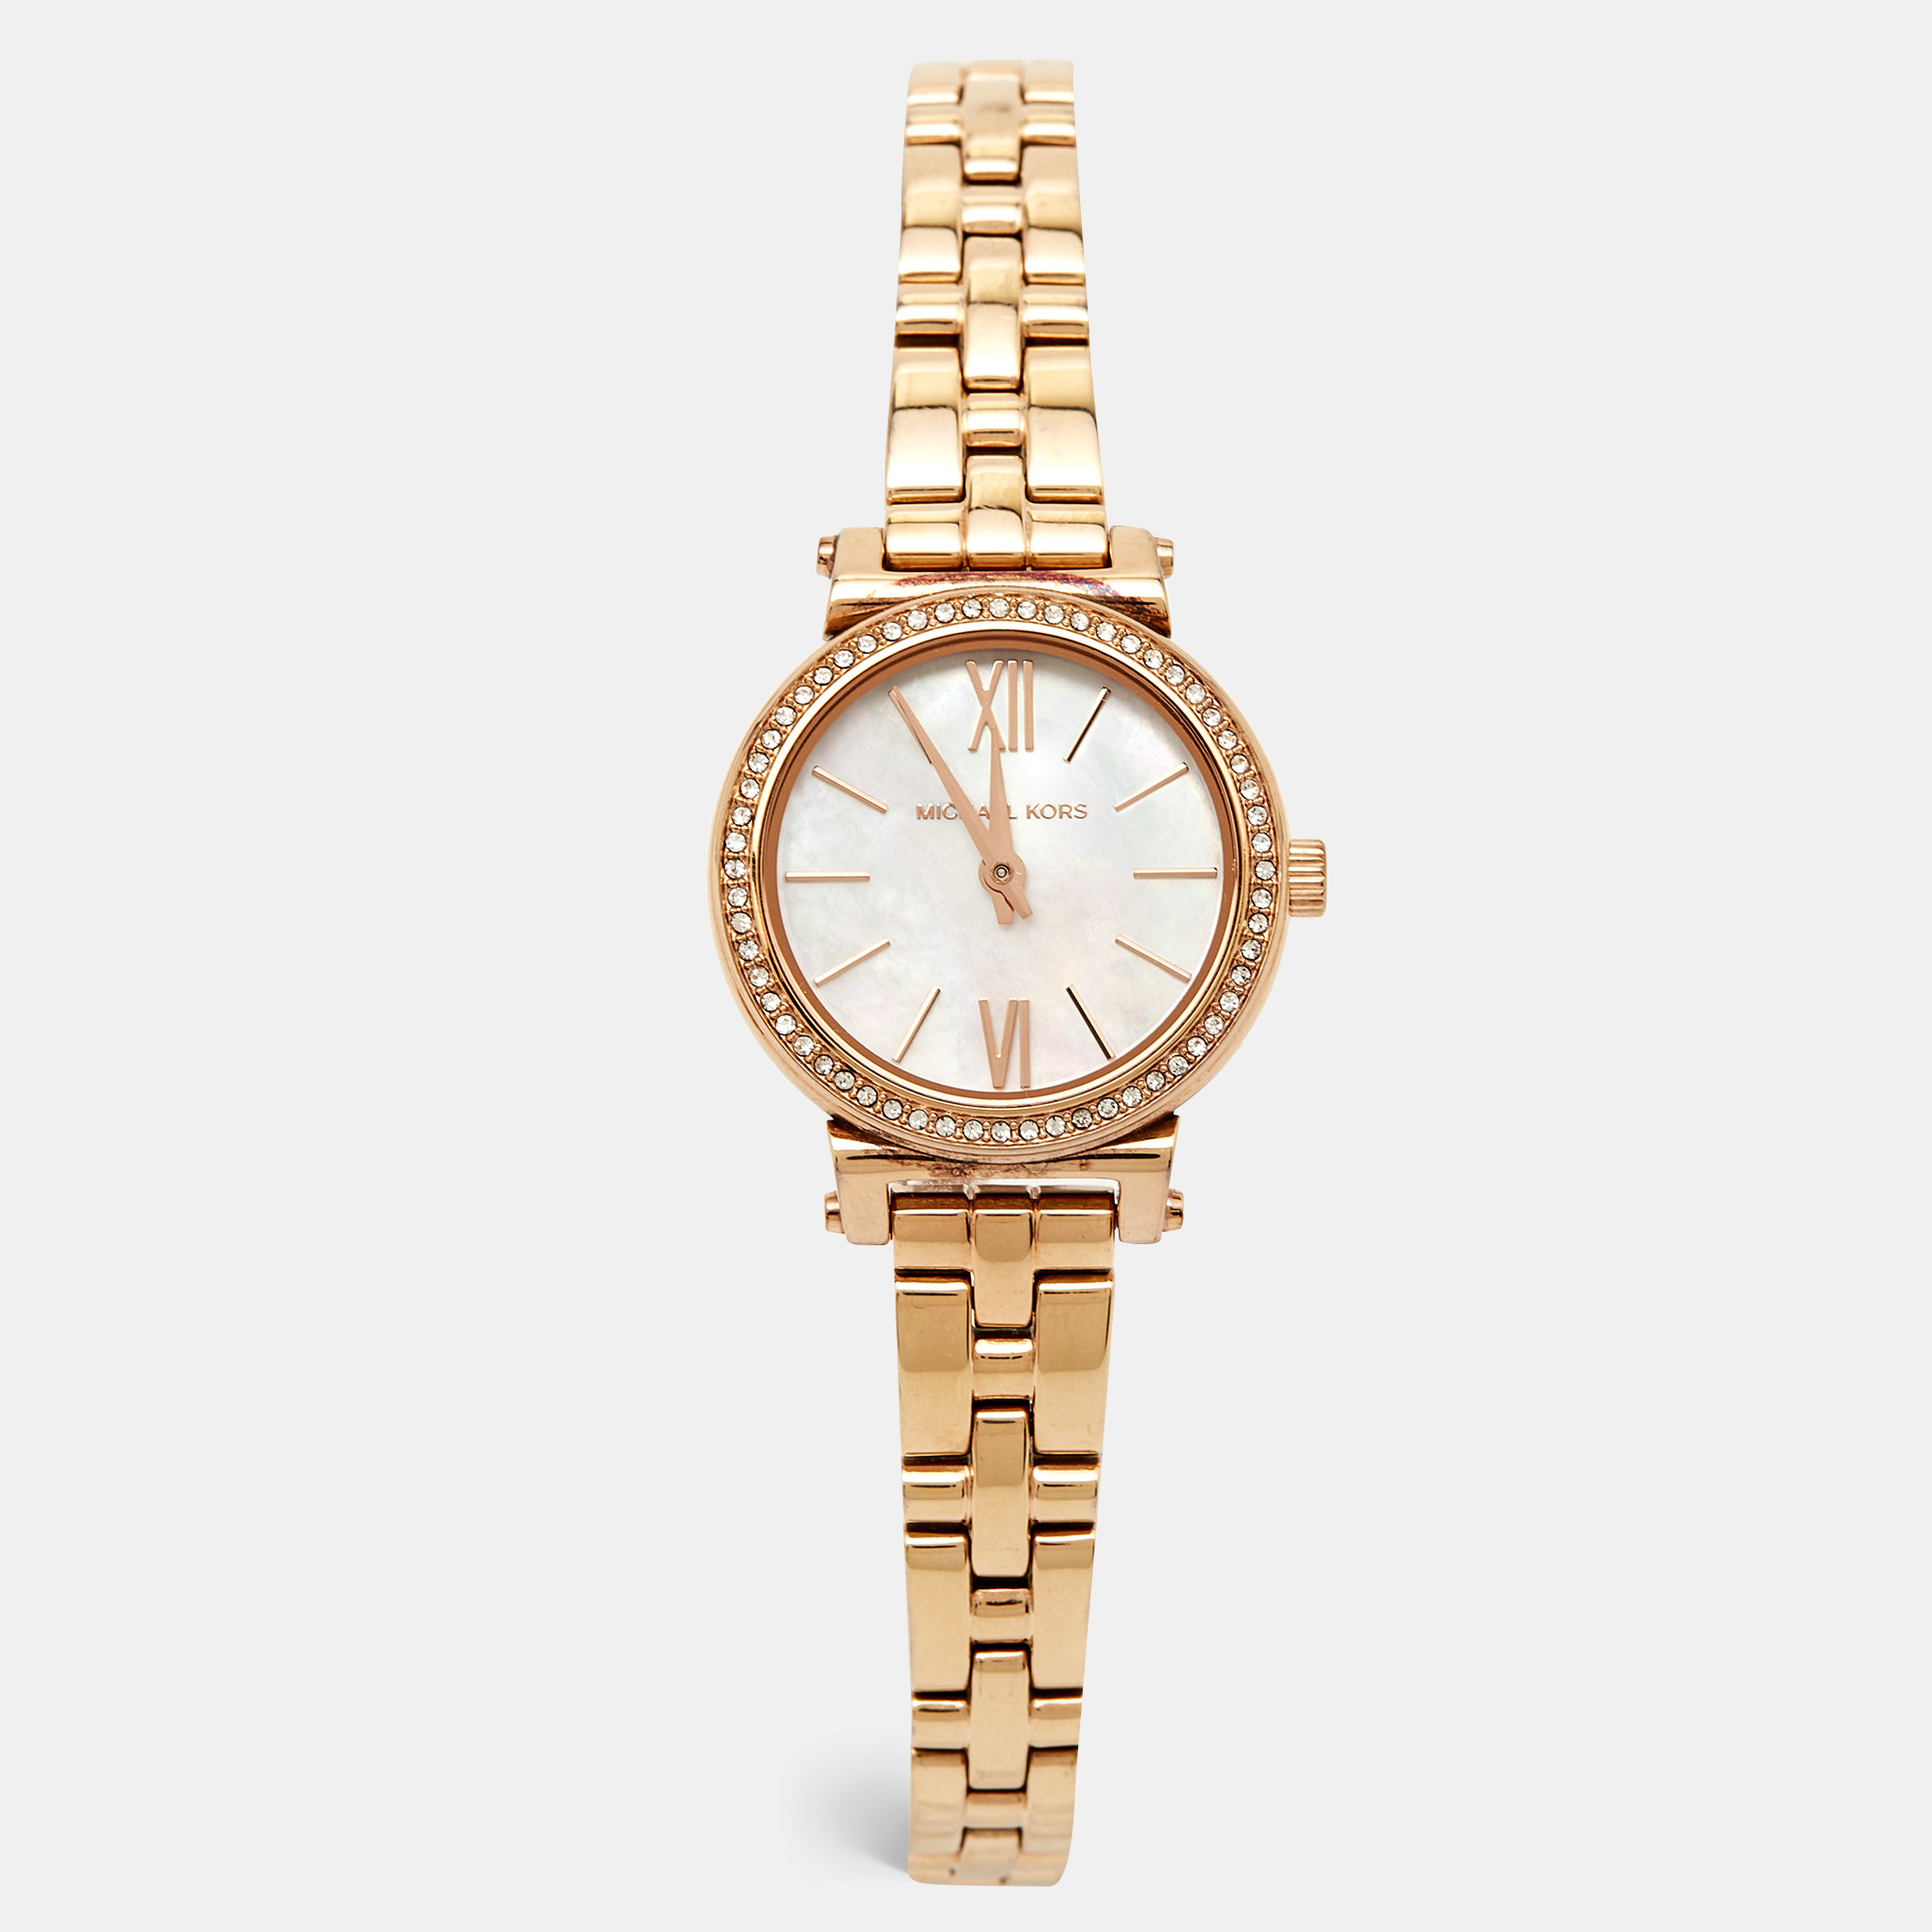 Michael kors mother of pearl rose gold plated stainless steel sofie mk3834 women's wristwatch 26 mm